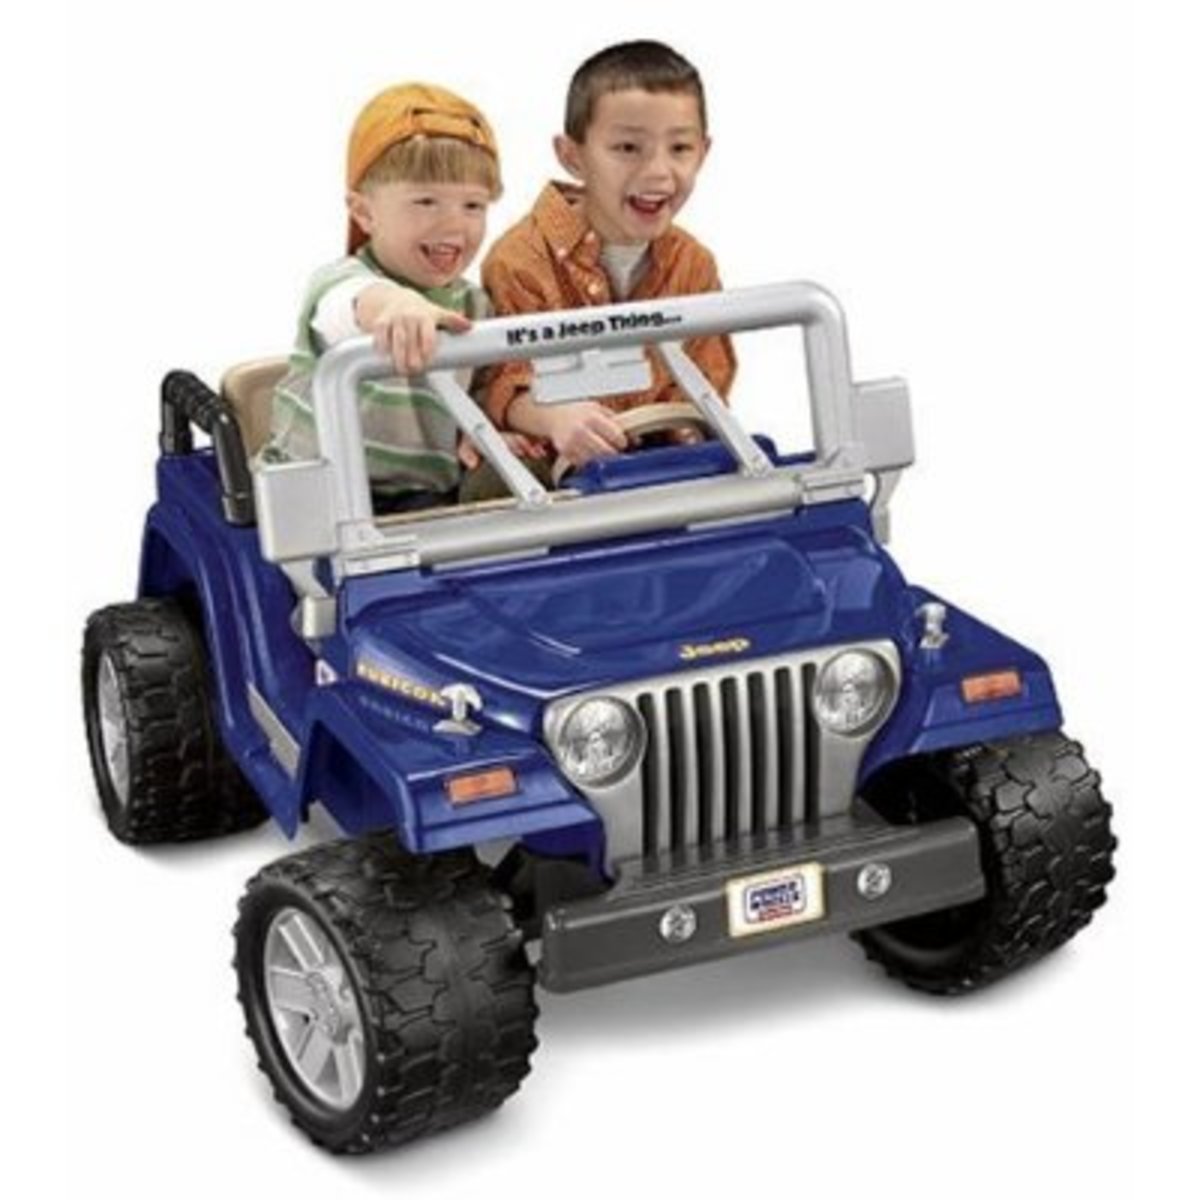 Kids Ride On Toys at Discount Prices